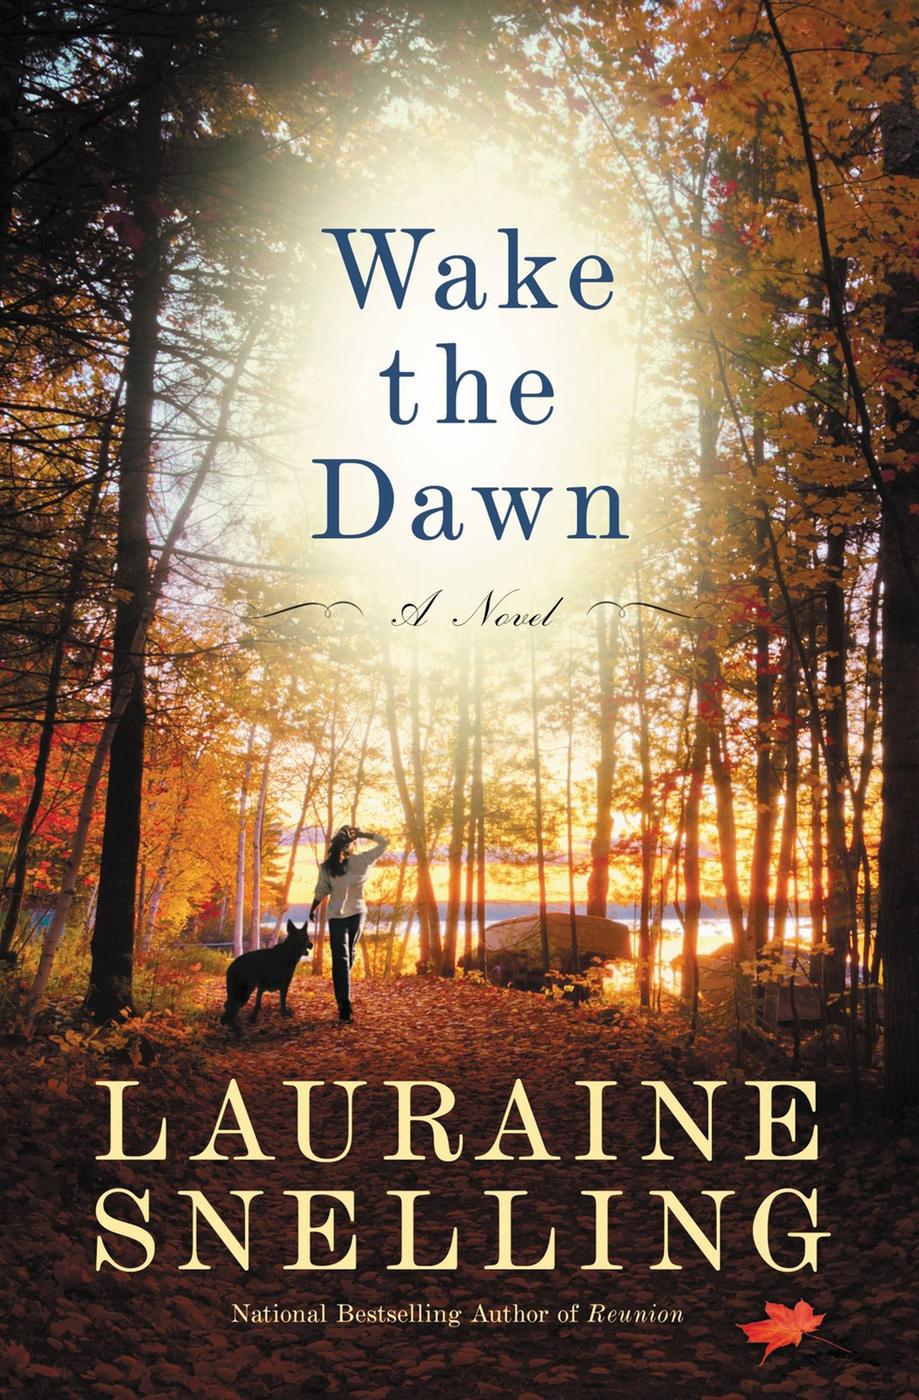 Wake the Dawn (2013) by Lauraine Snelling